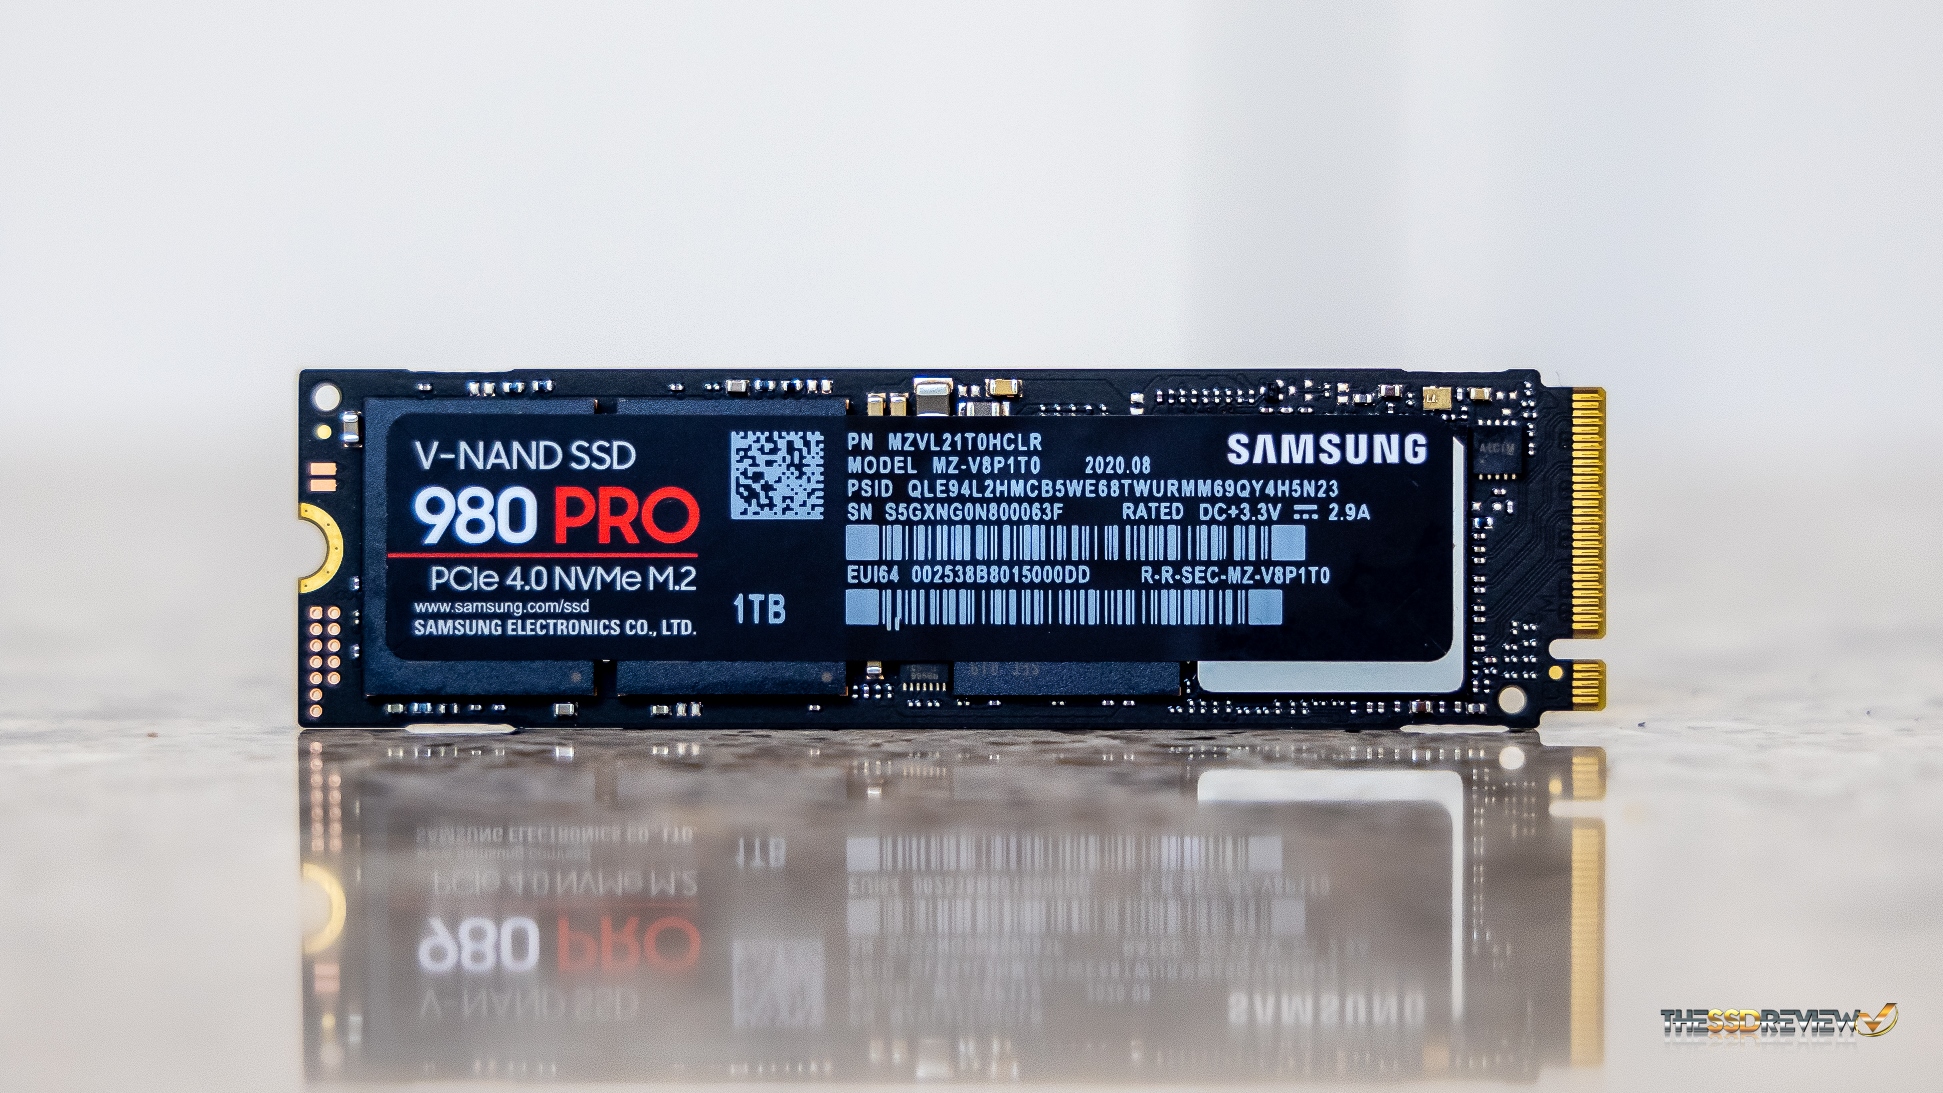 Samsung 980 Pro SSD Review – One of the fastest PCIe 4.0 SSDs in the market